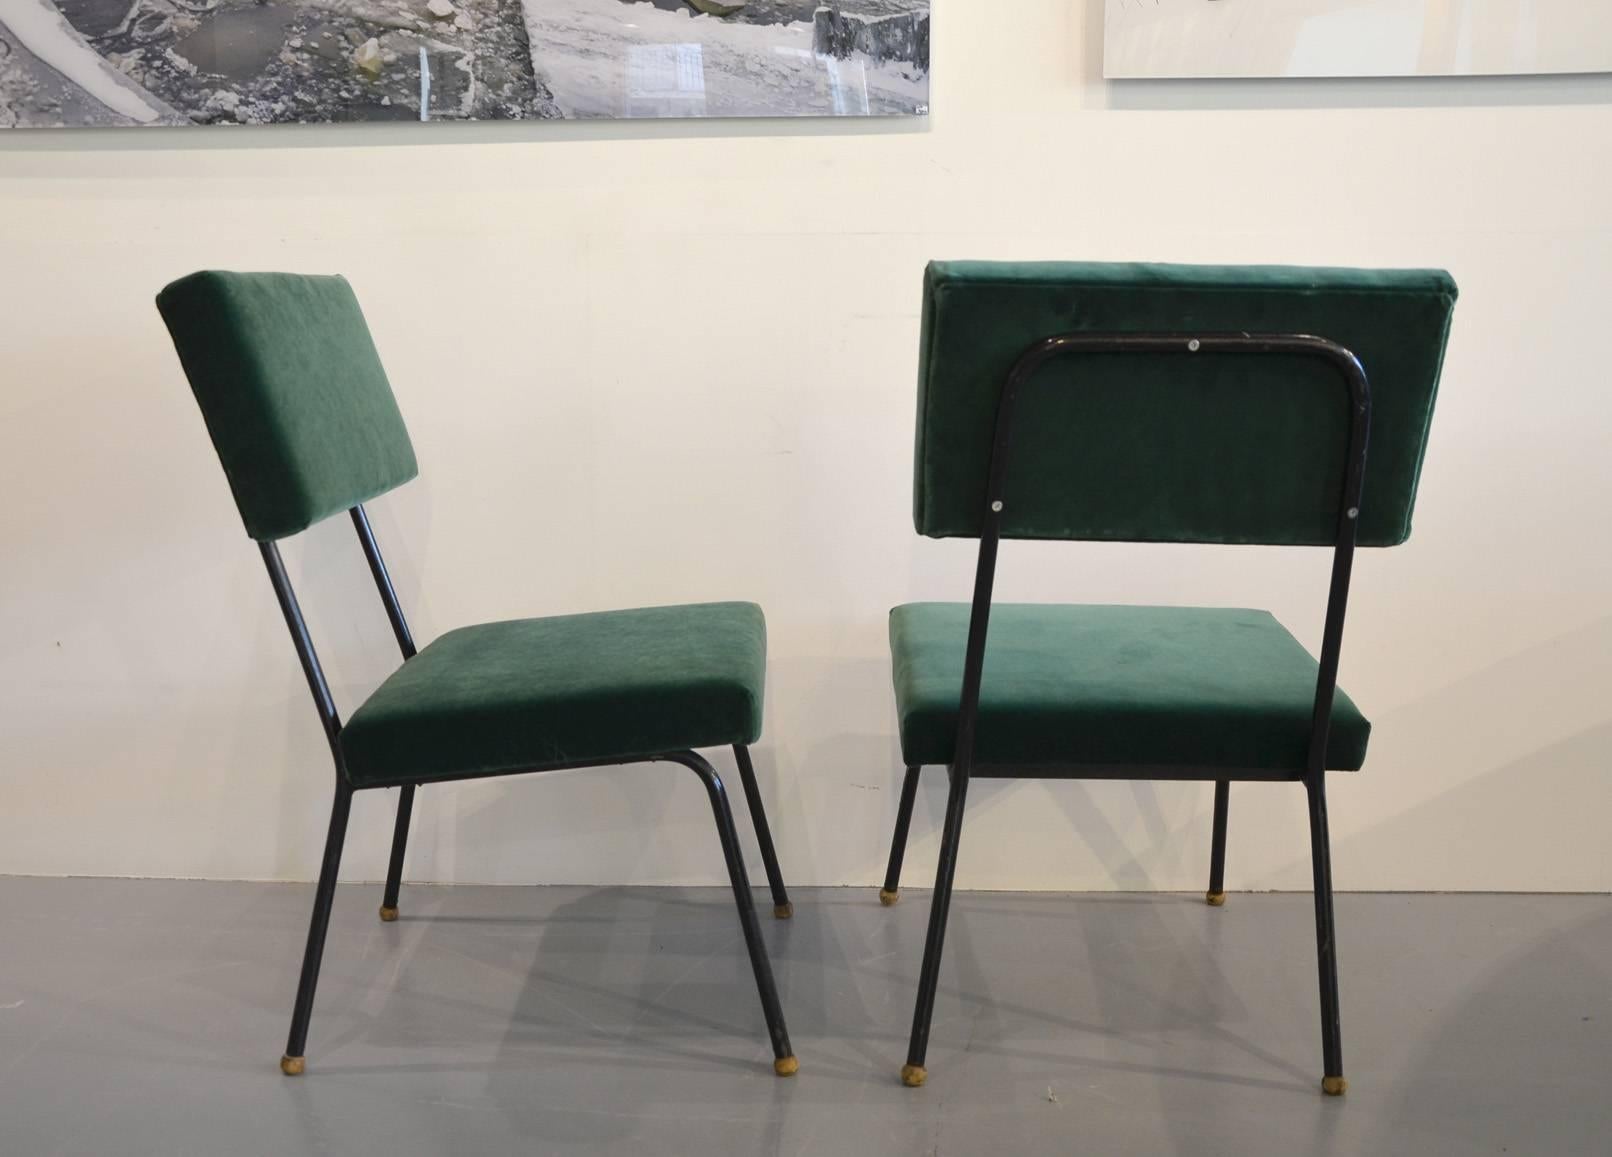 Set of Two Reupholstered Low Chairs, circa 1960. Green velvet